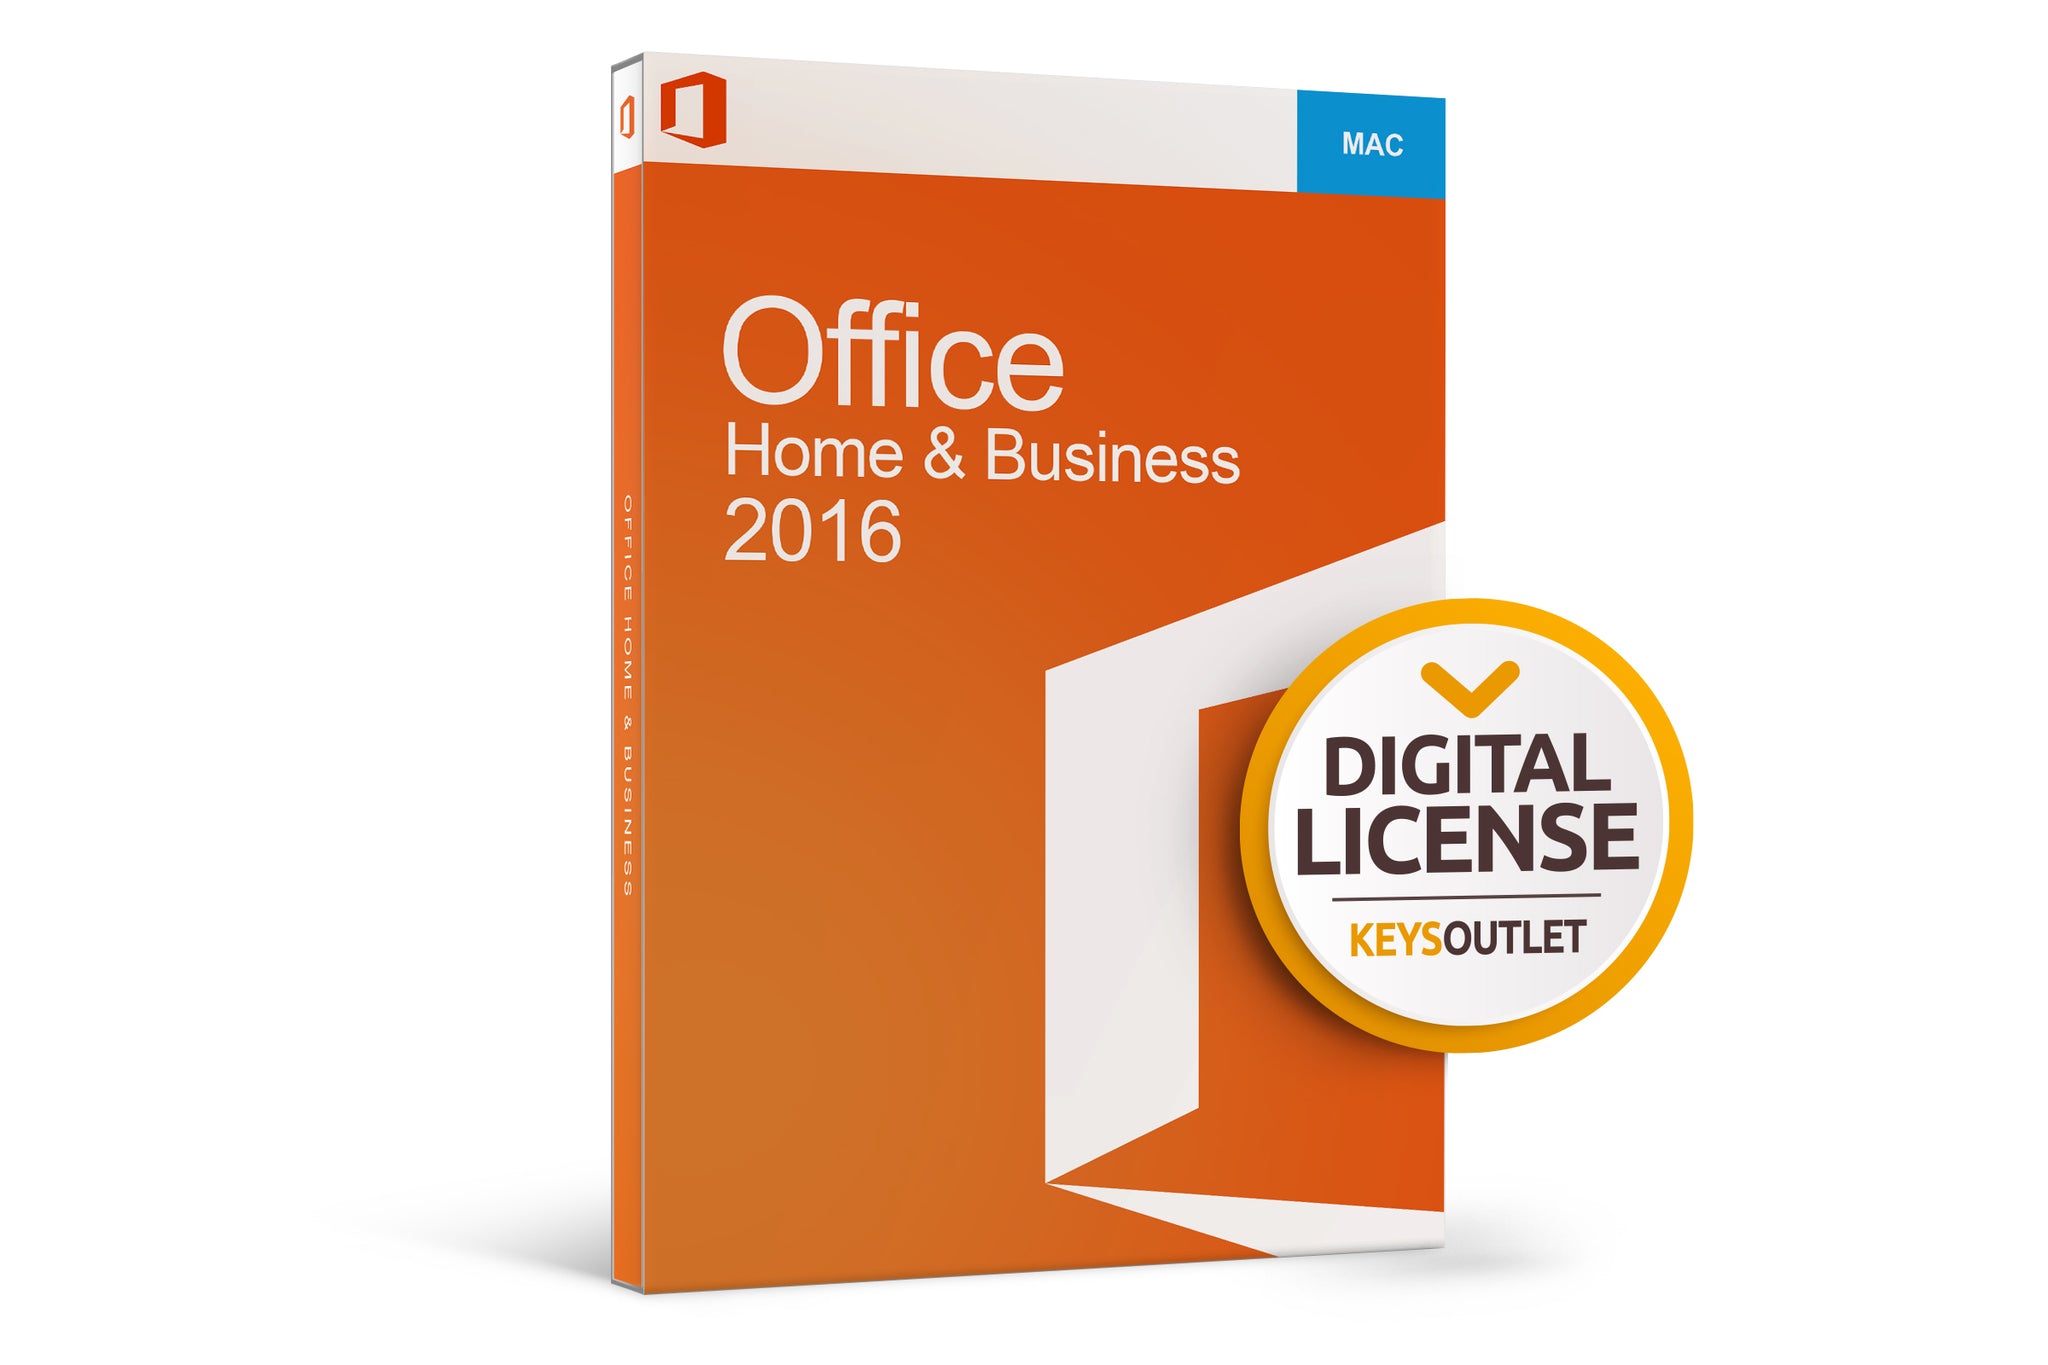 Office 2016 Home & Business MacOS